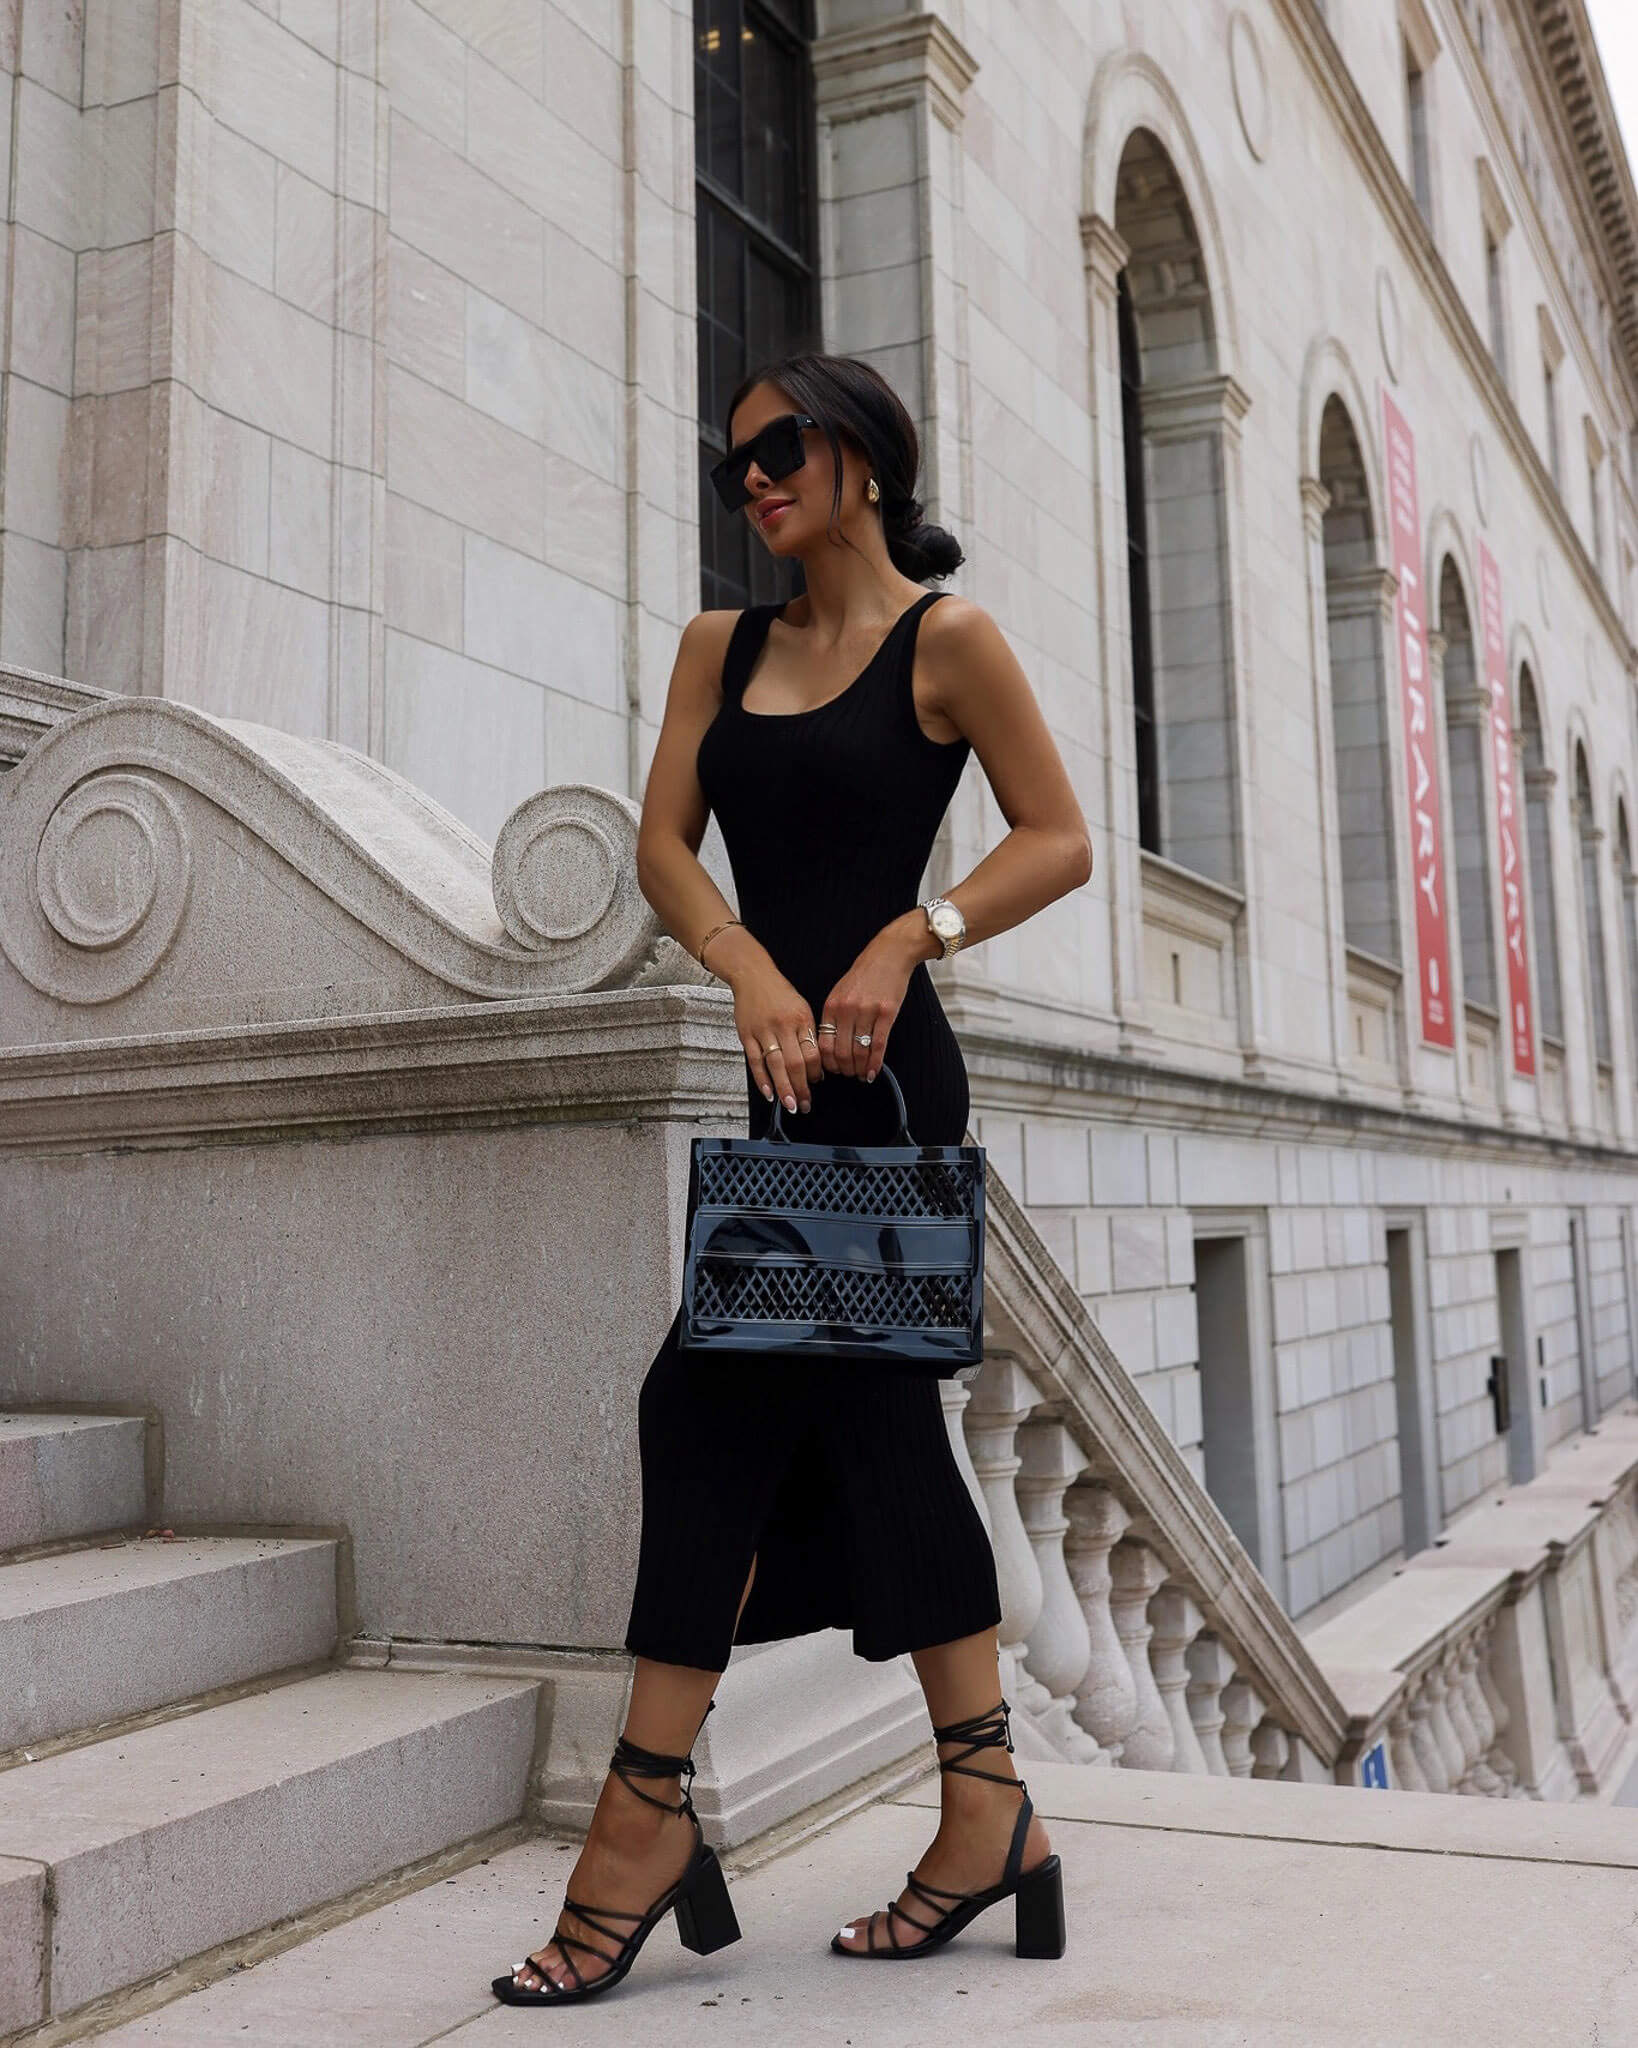 black strappy wedges outfit